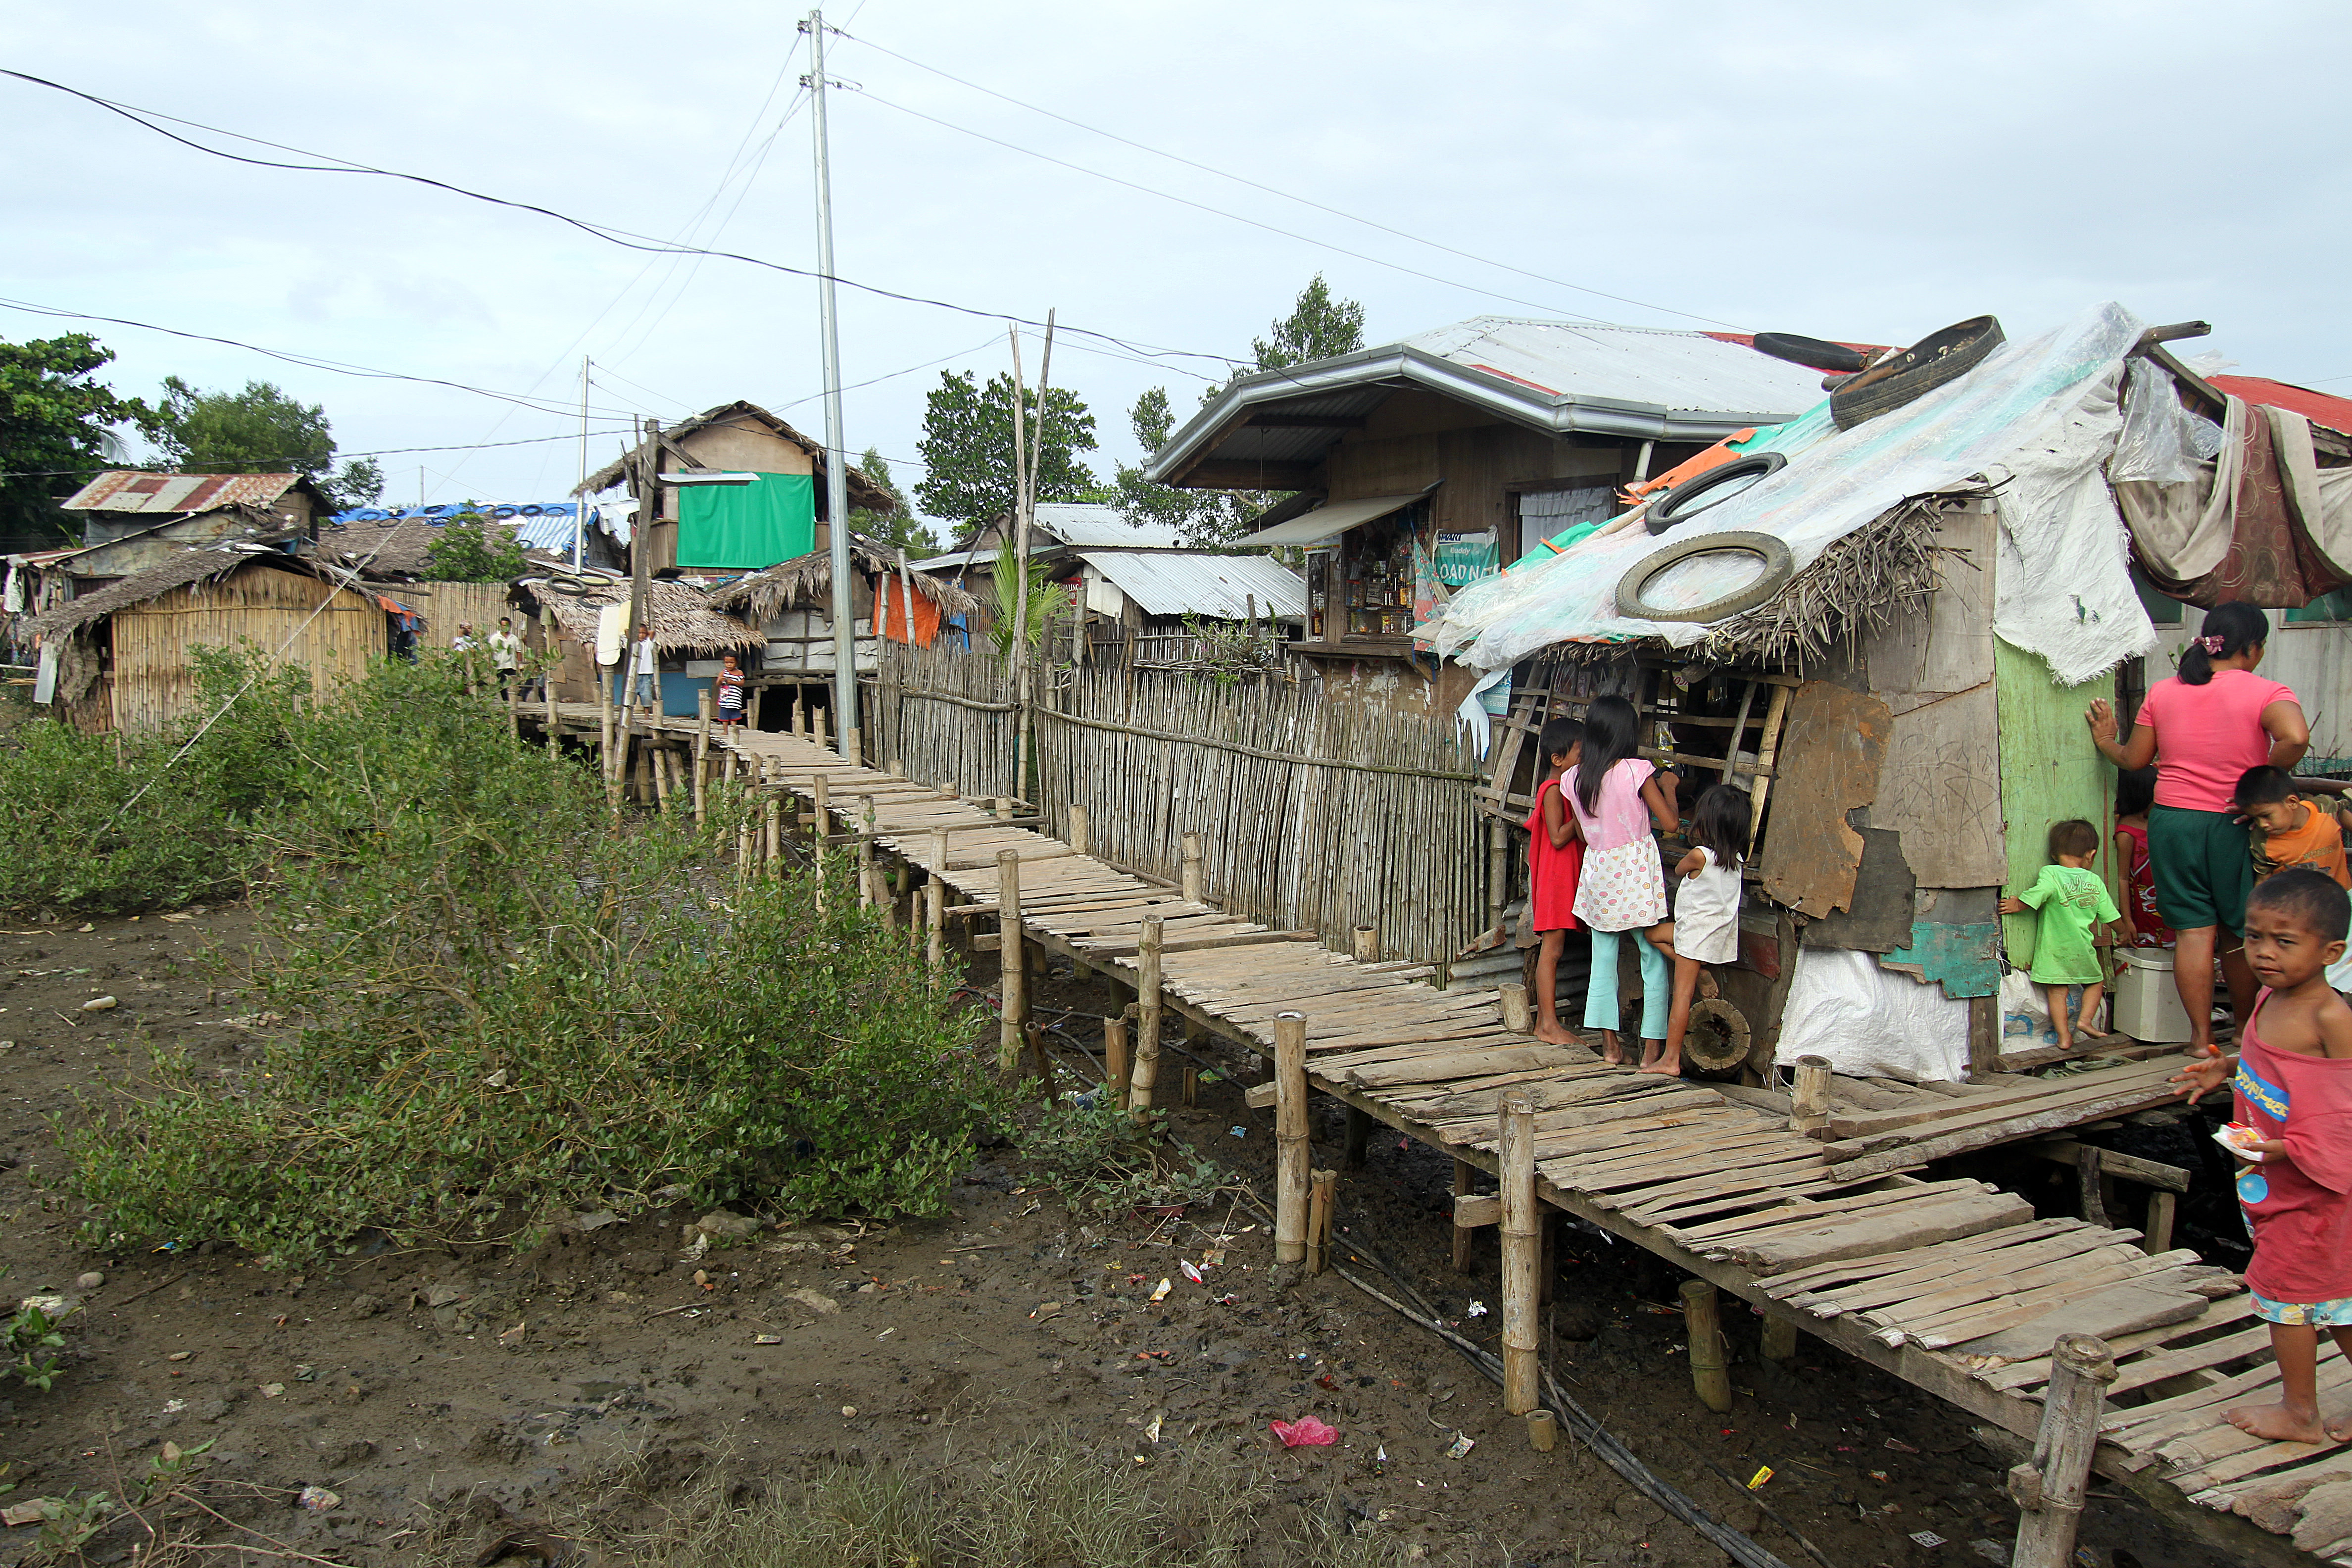 The Masbate community in the Philippines